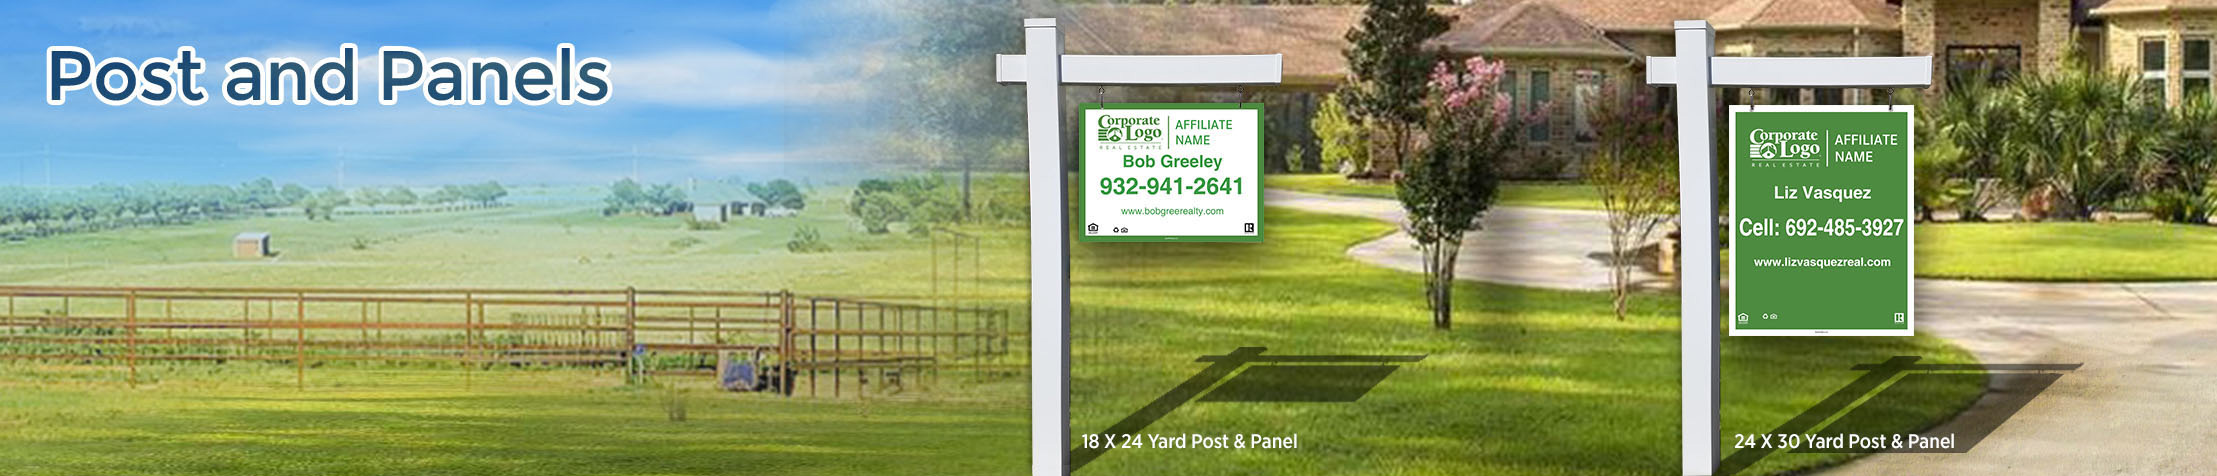 Better Homes and GardensReal Estate Post and Panel - Better Homes and Gardens real estate signs | BestPrintBuy.com